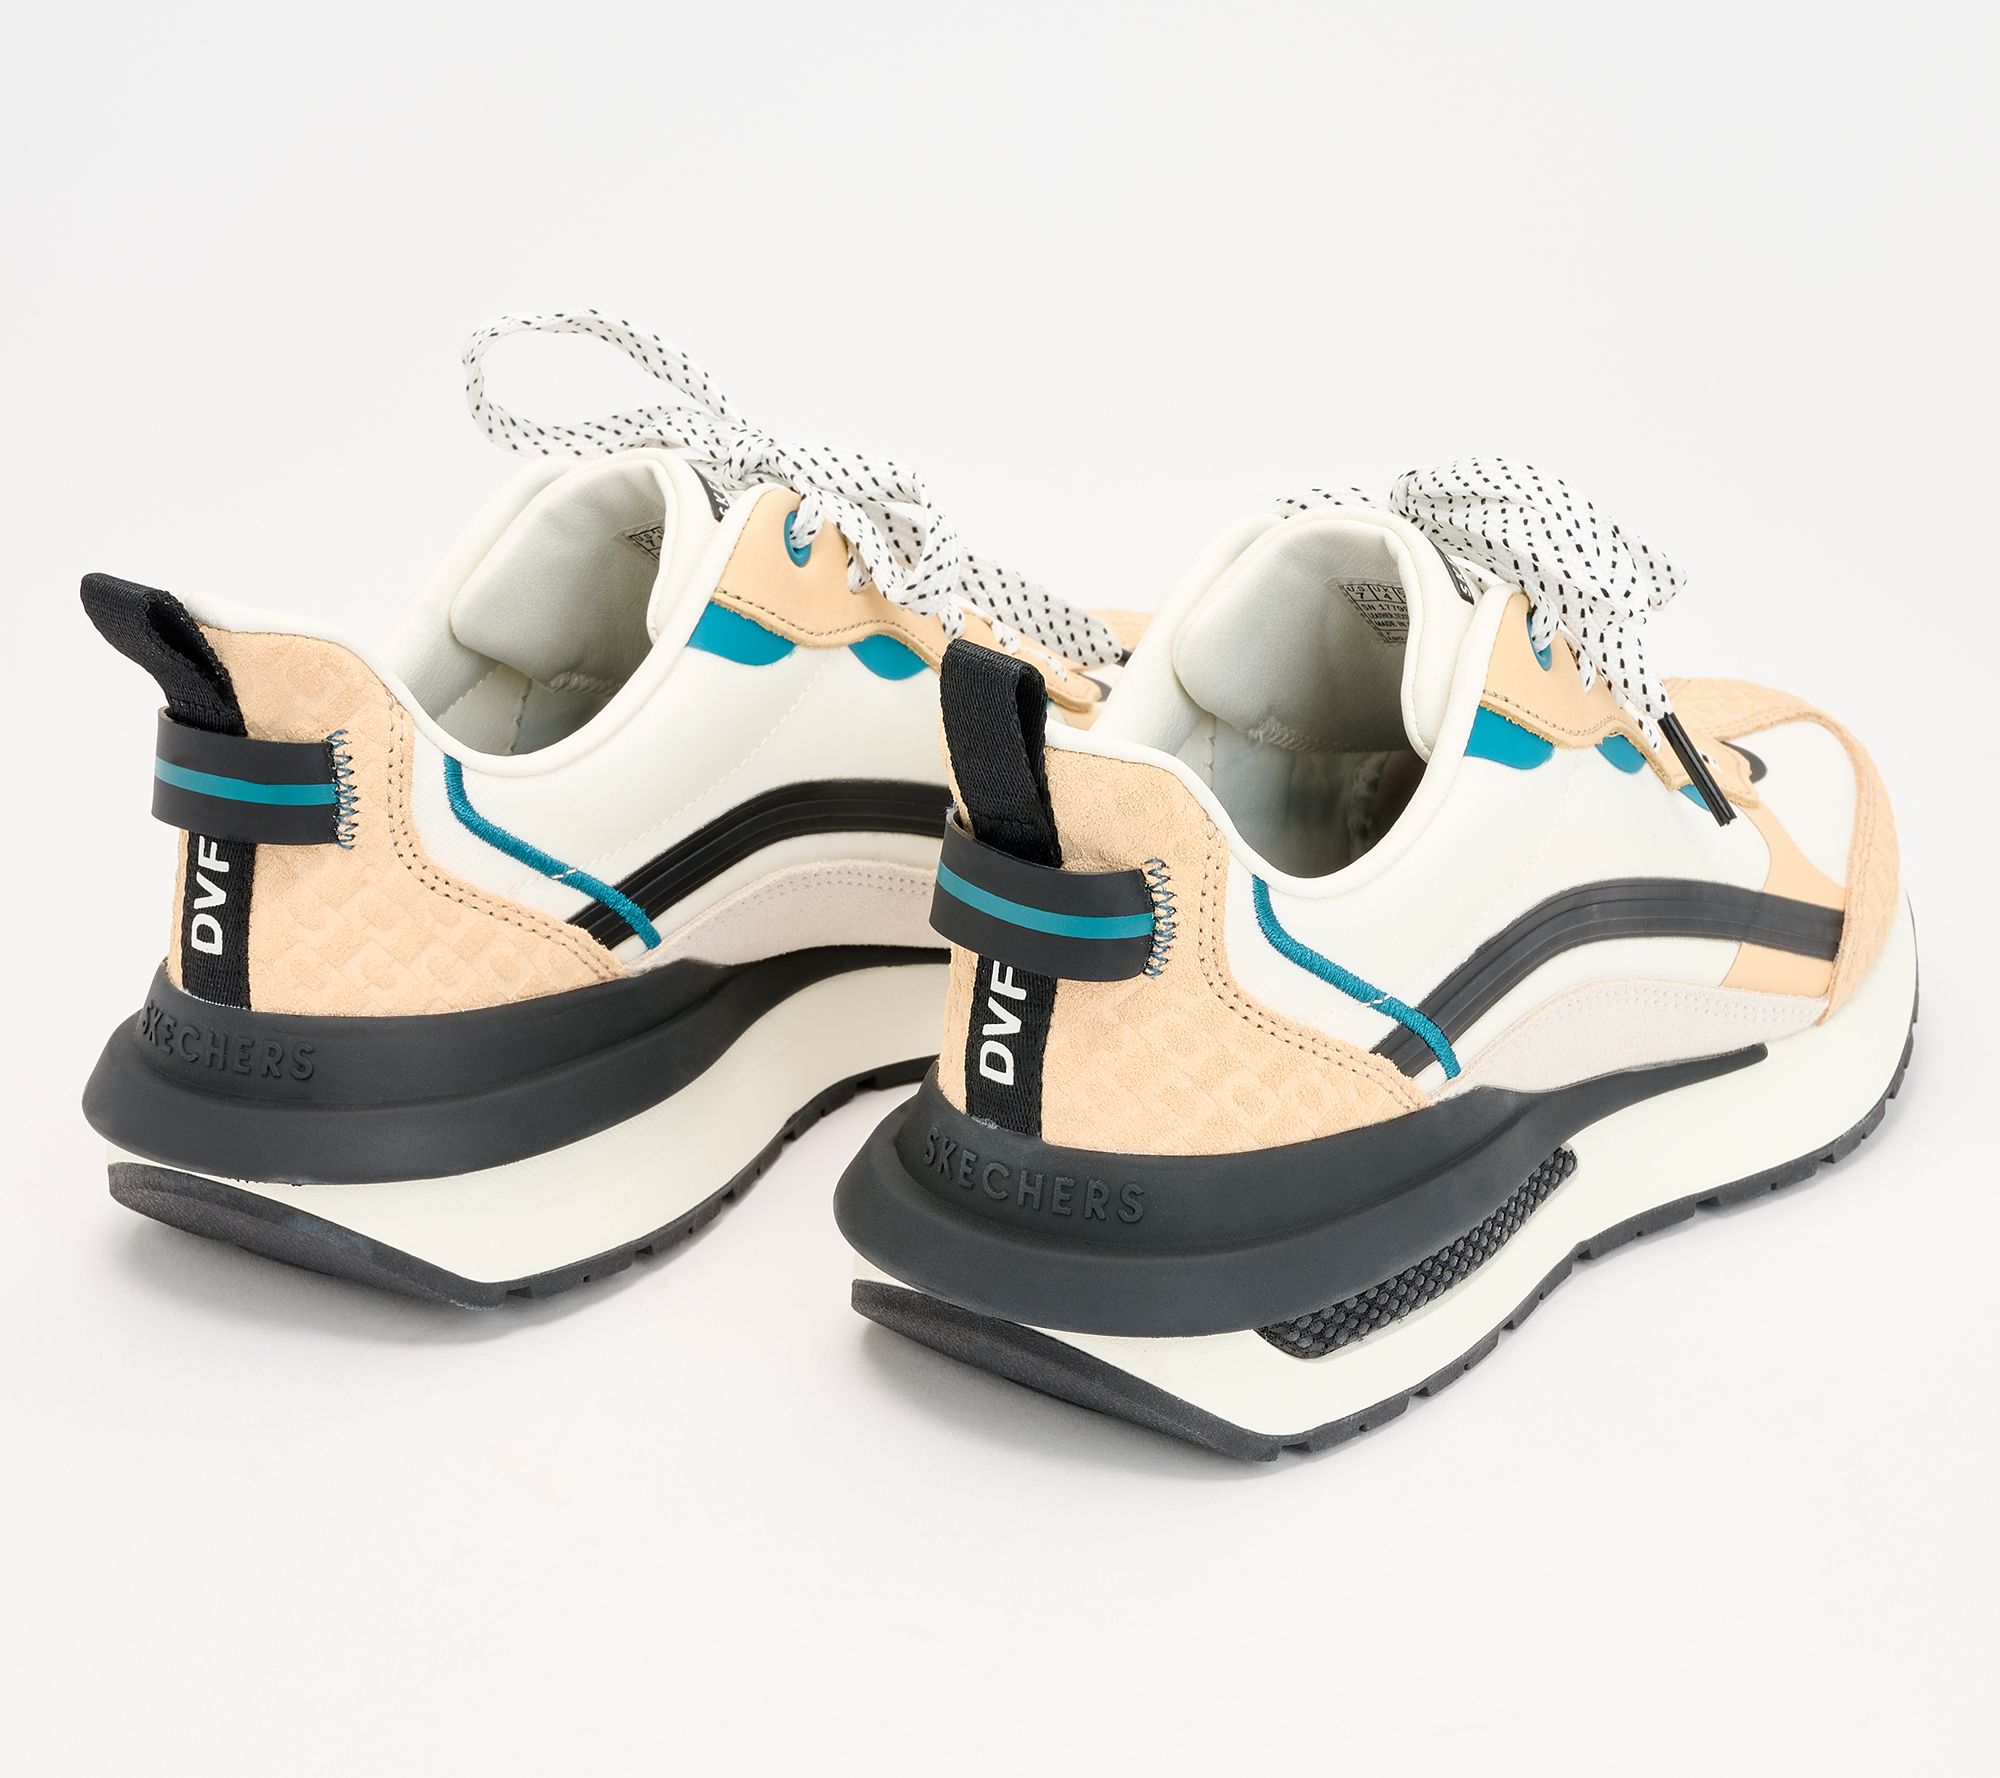 DVF x Skechers Suede Lace-Up Sneakers - Halos 